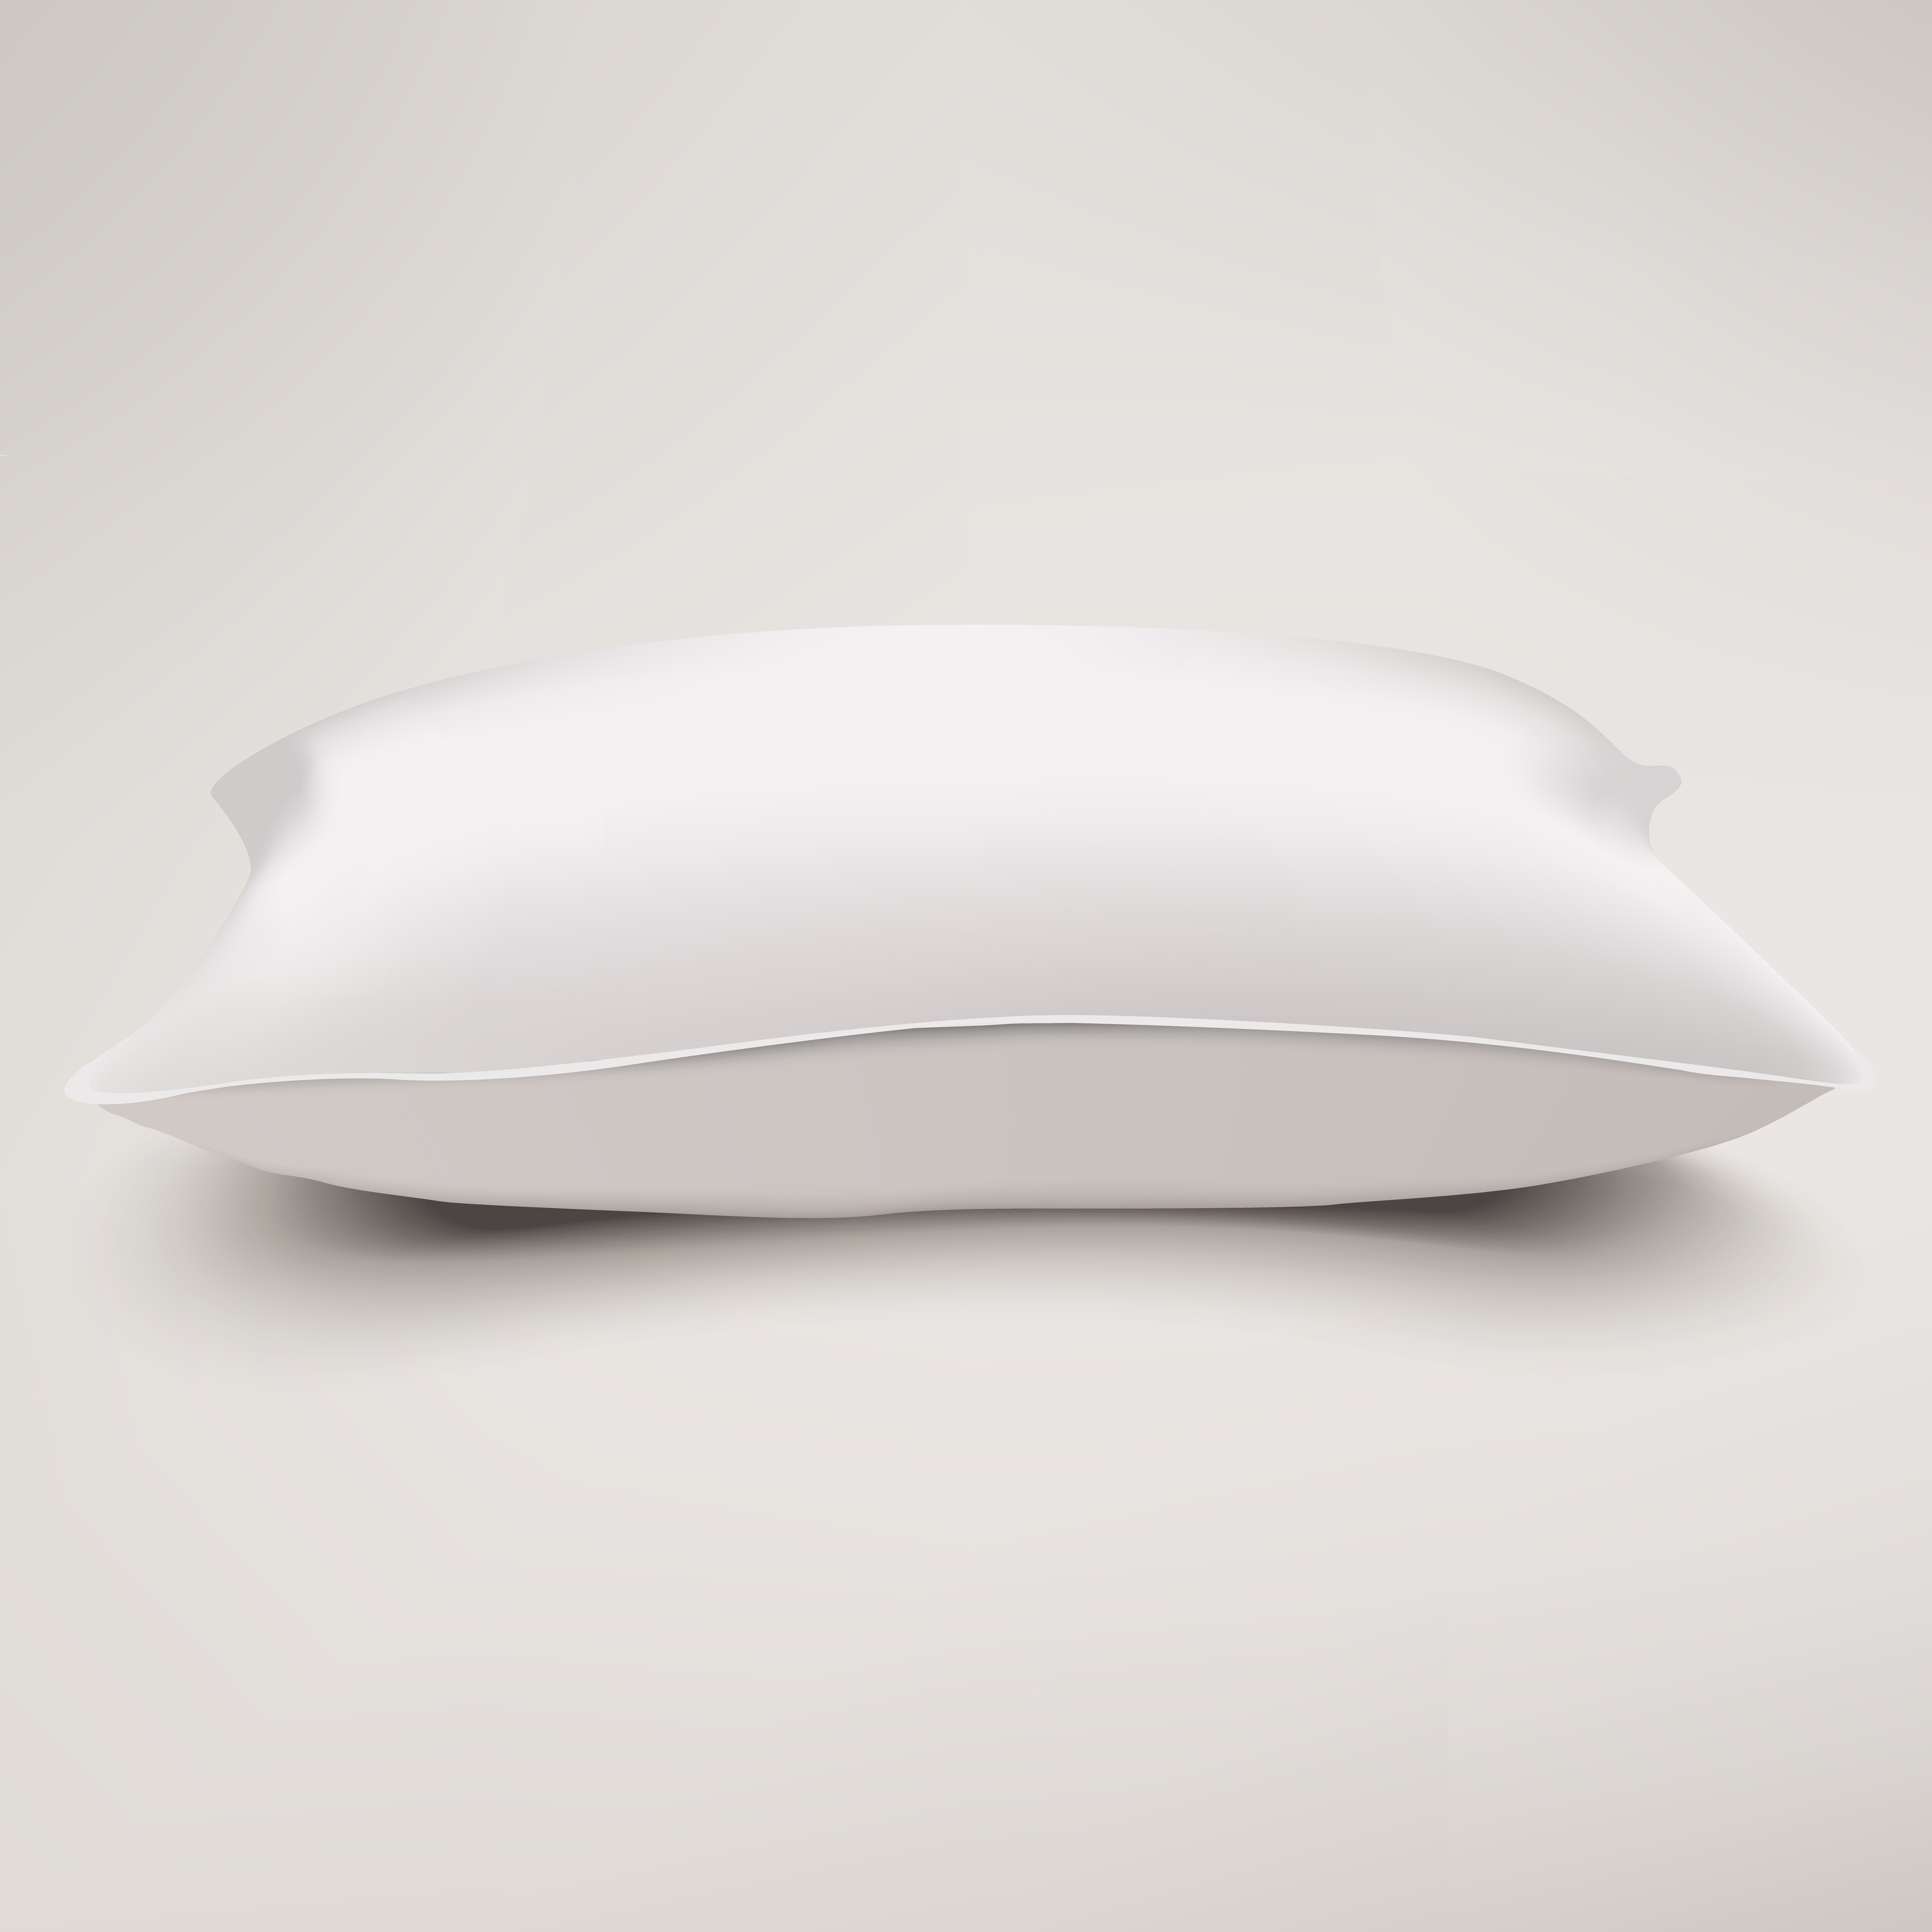 Reserved Very Important Pillow is a revolutionary new product with widespread consumer appeal.